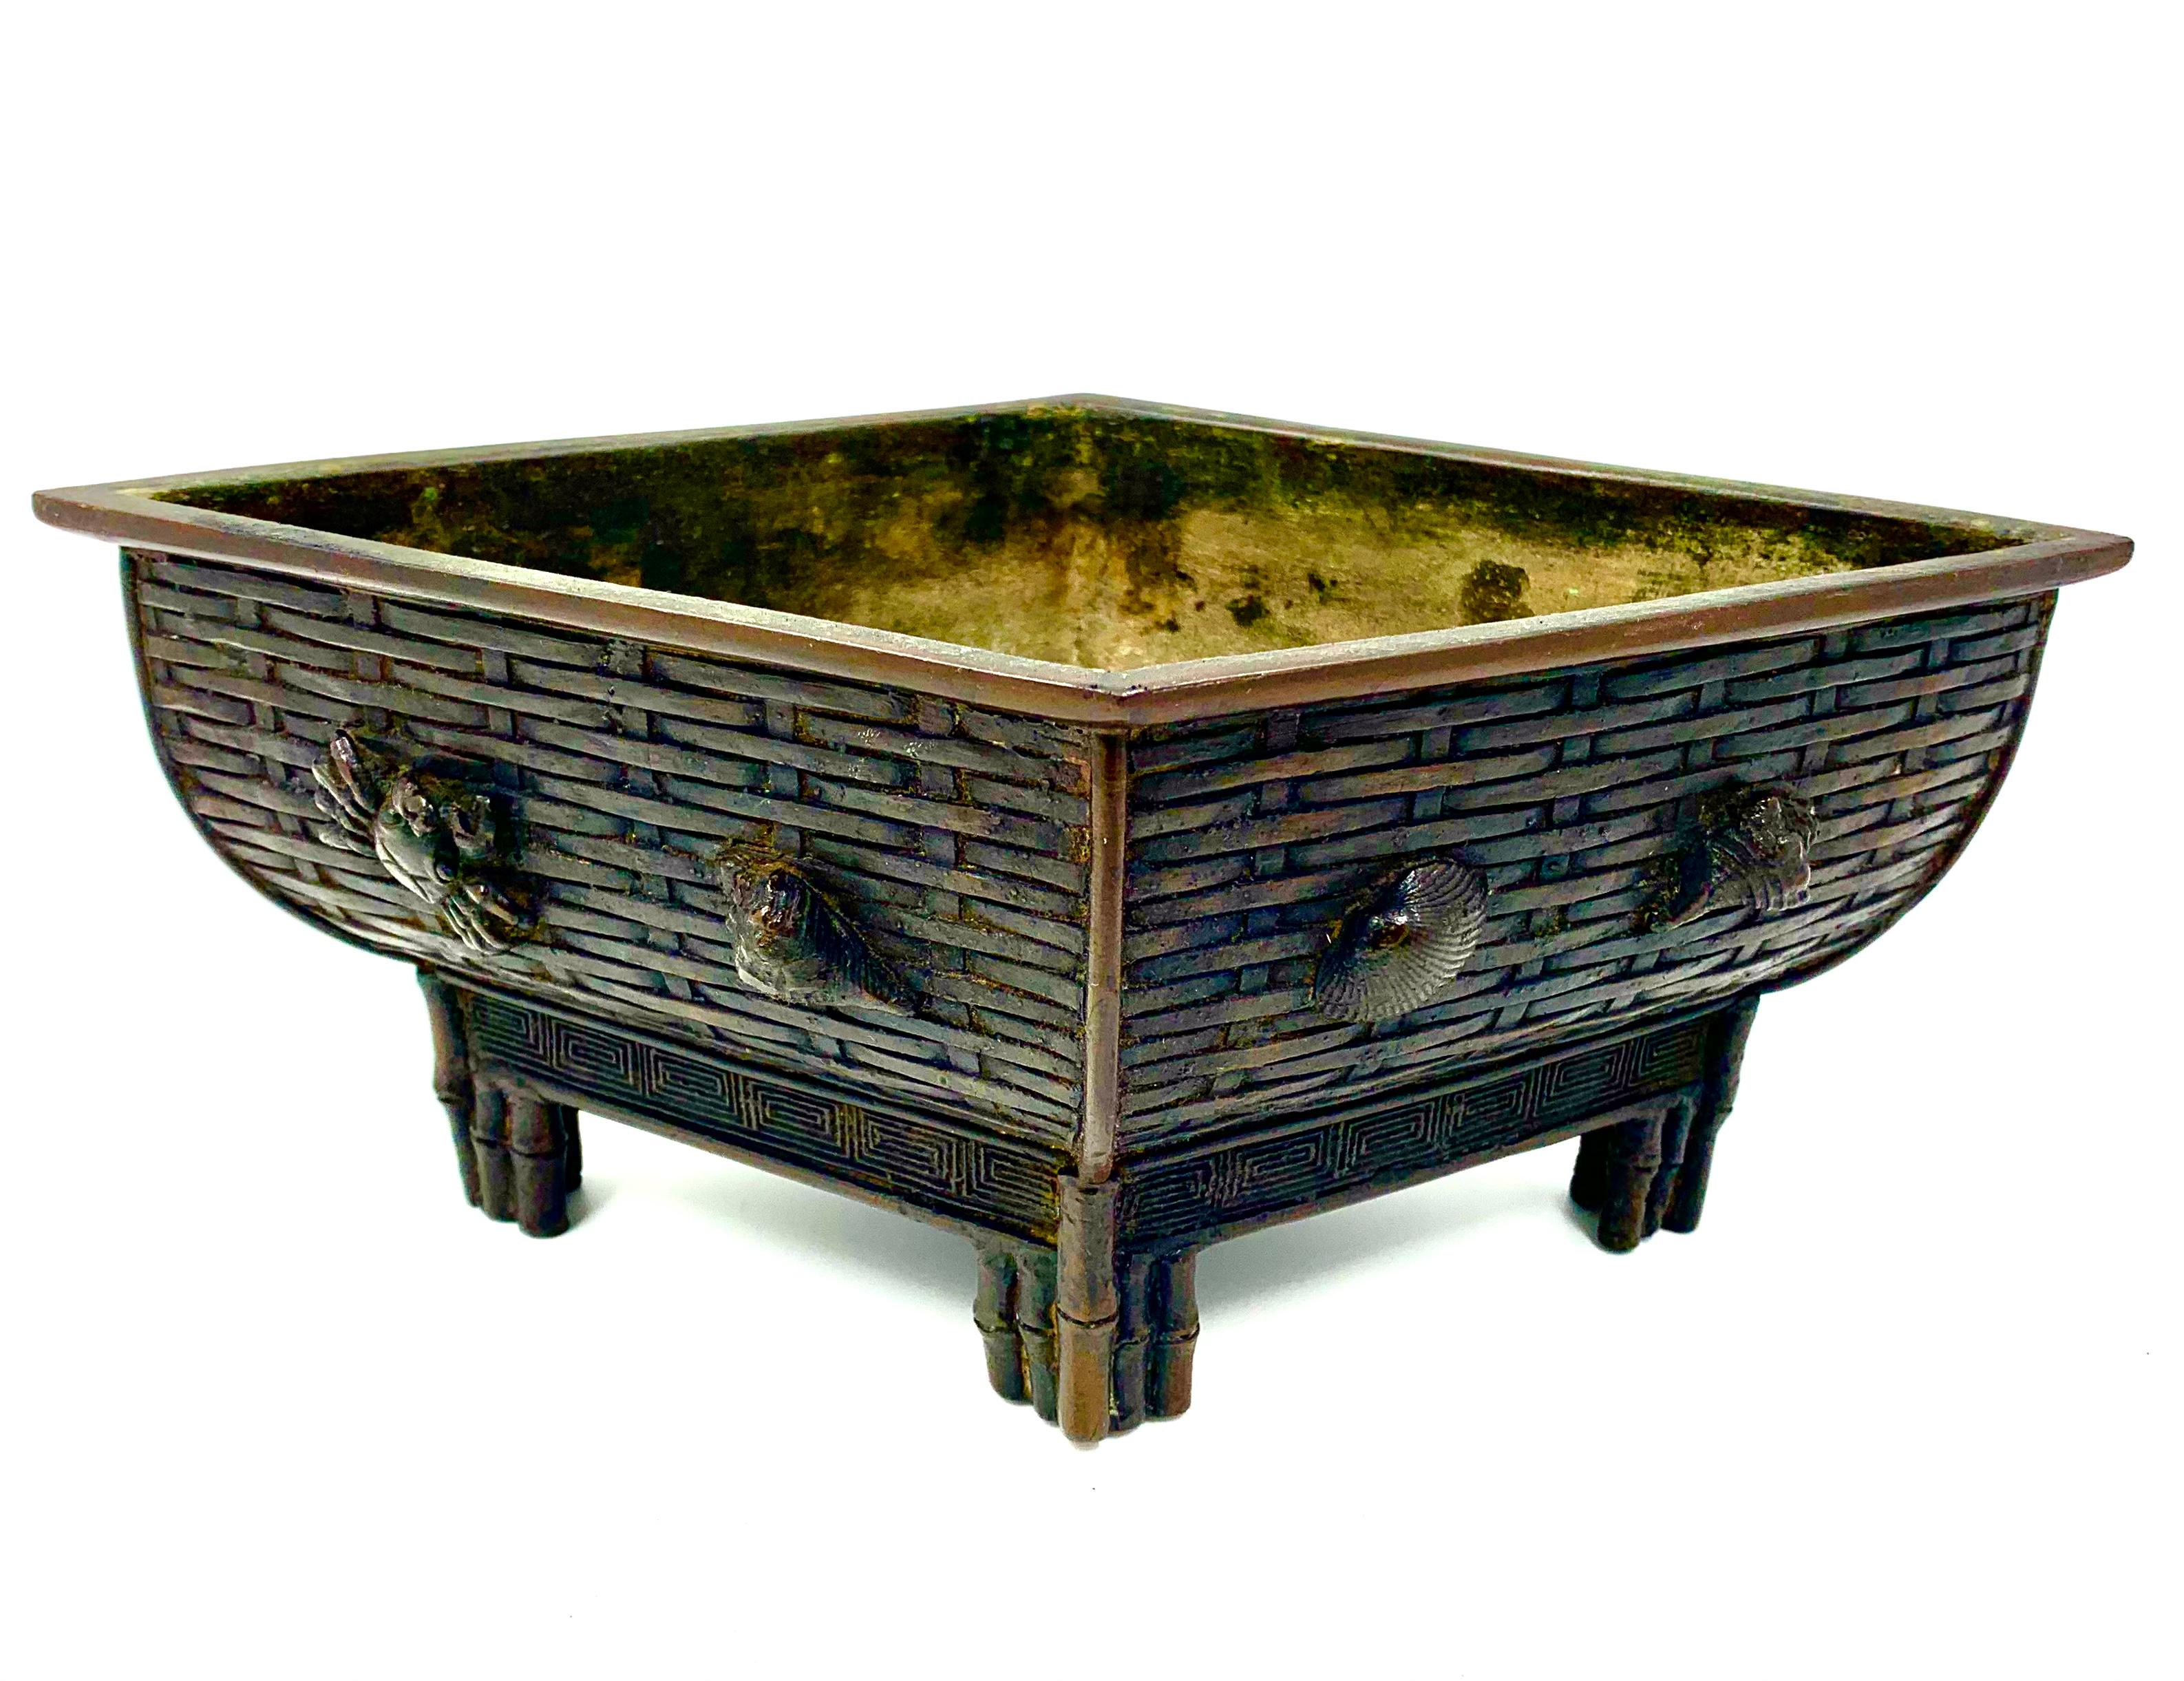 Unusual rhombus shaped Japanese Meiji period bronze sea-life motif bonsai, bamboo planter, ikebana. The body in the form of a densely woven basket of fine detail, with a large lobster, clam shell, cockle, conch, crab, pearl oyster and whelk